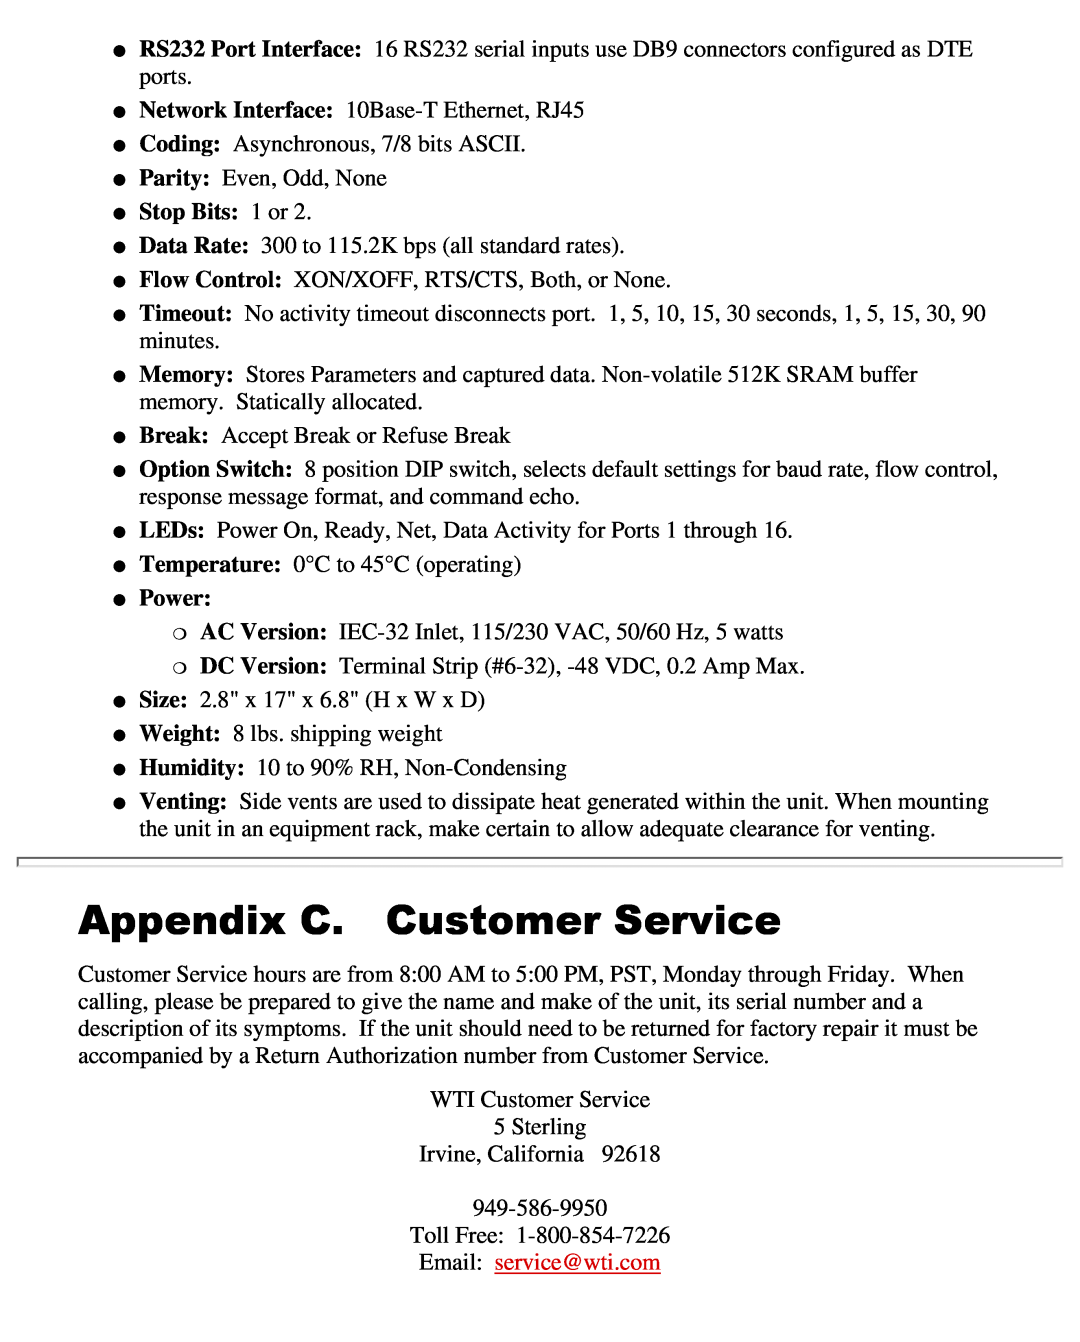 Western Telematic CMS-16 manual Appendix C. Customer Service, Stop Bits 1 or, Power 